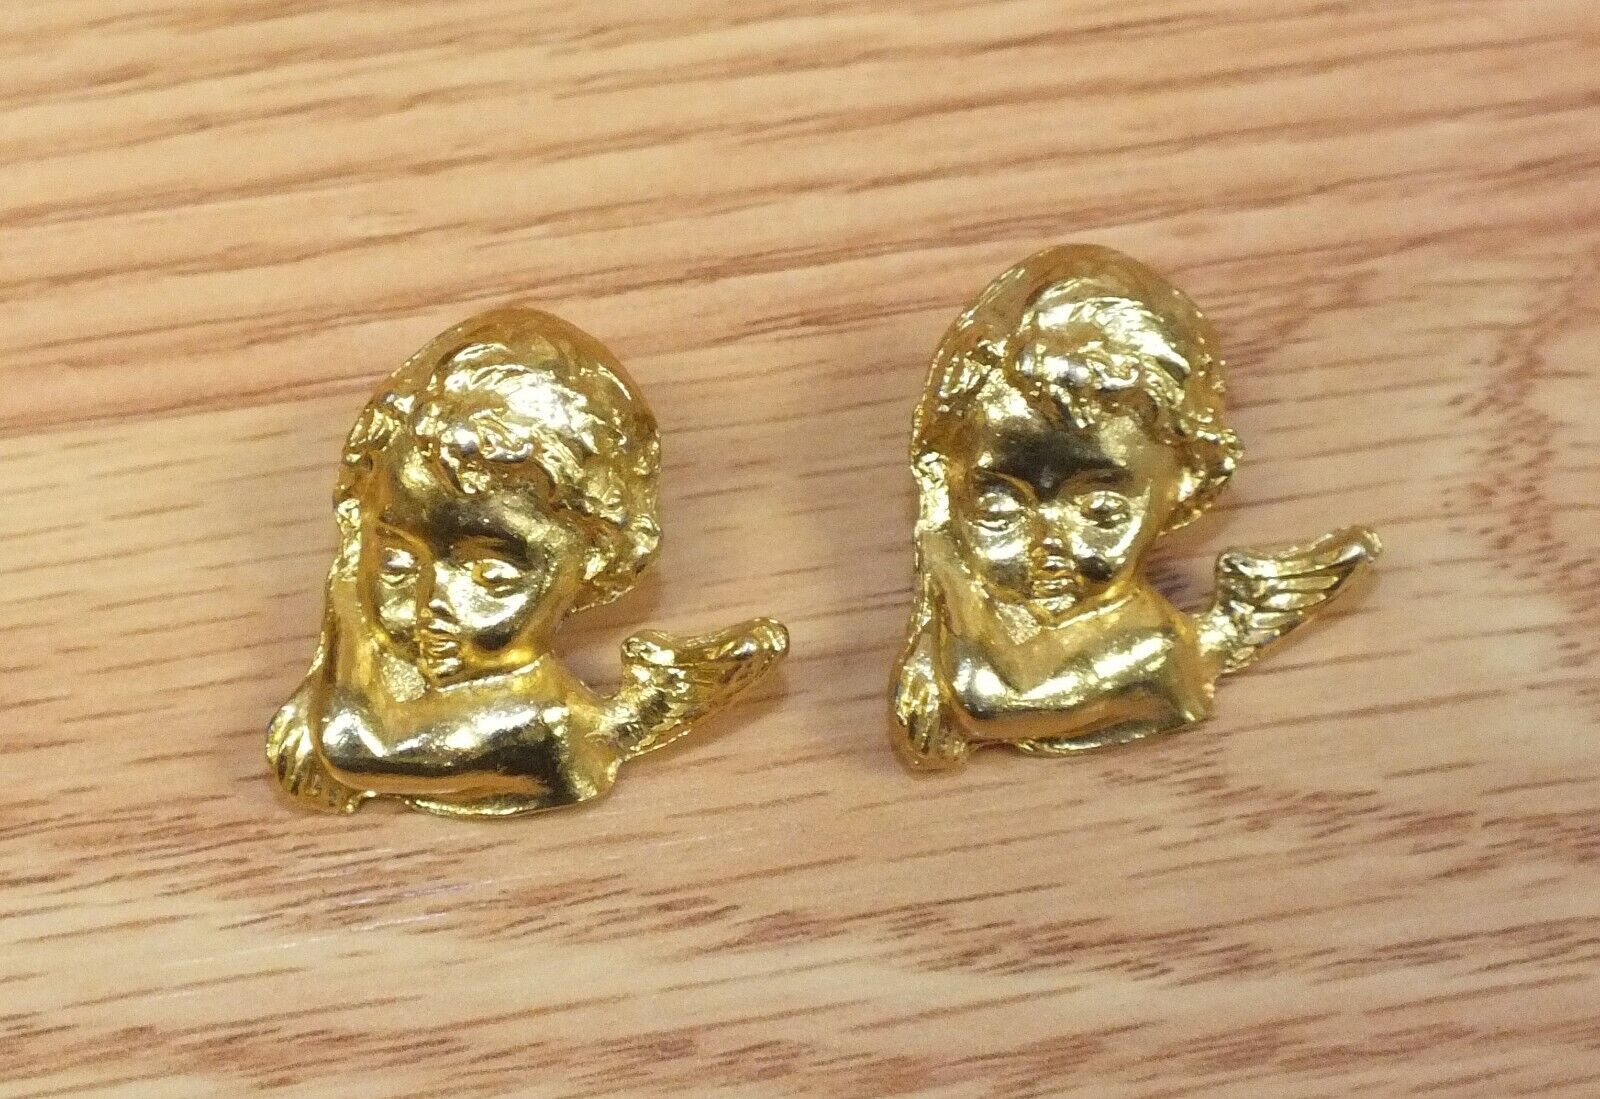 Lot of 2 Genuine Camco Gold Tone Cherub Style Angel Best Friends Sisters Pins 